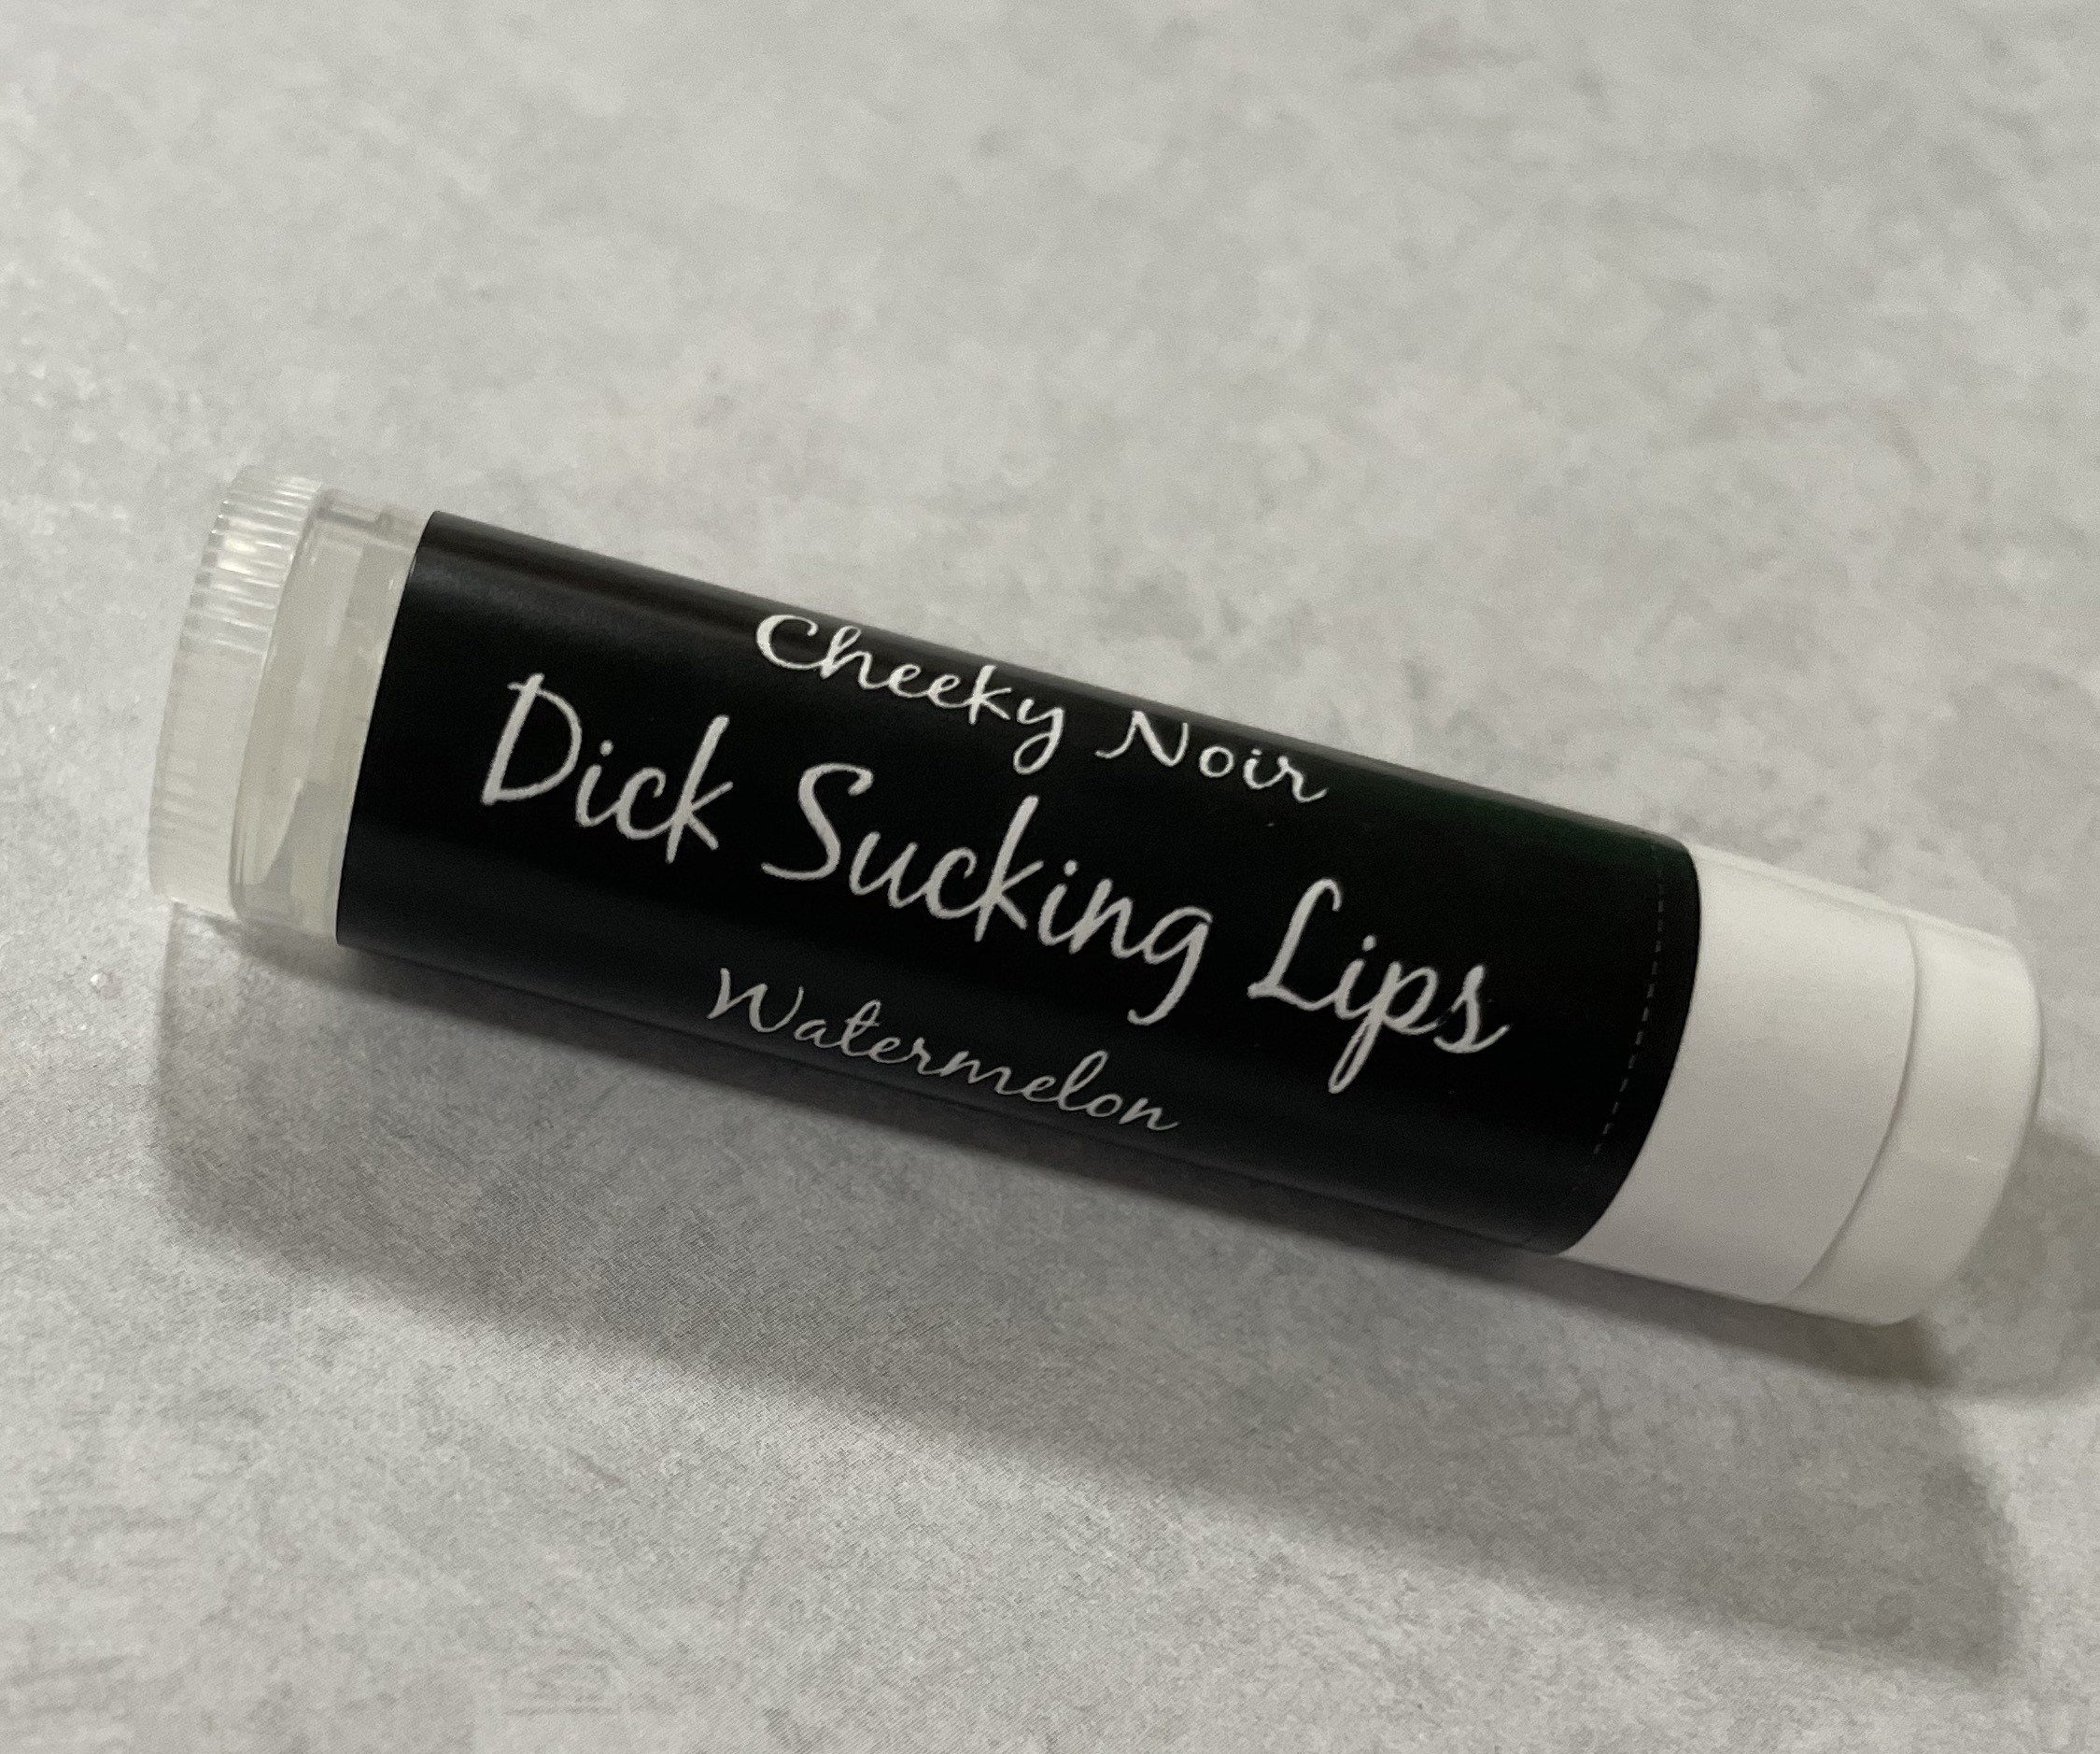 brad landess recommends dick sucking lip gloss pic